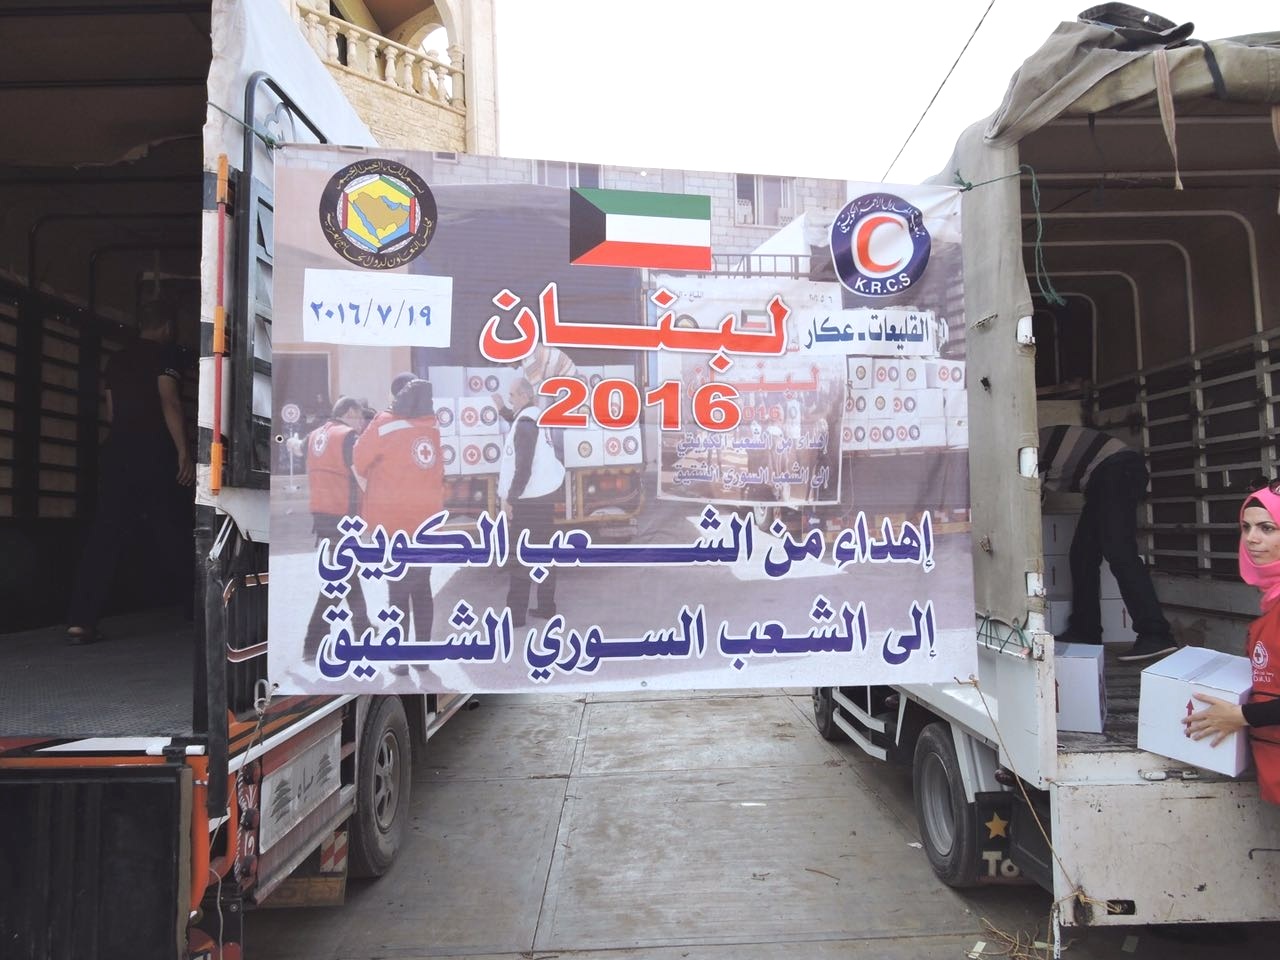 Kuwait Red Crescent Society's distributes aid for Syrian refugees in Lebanon